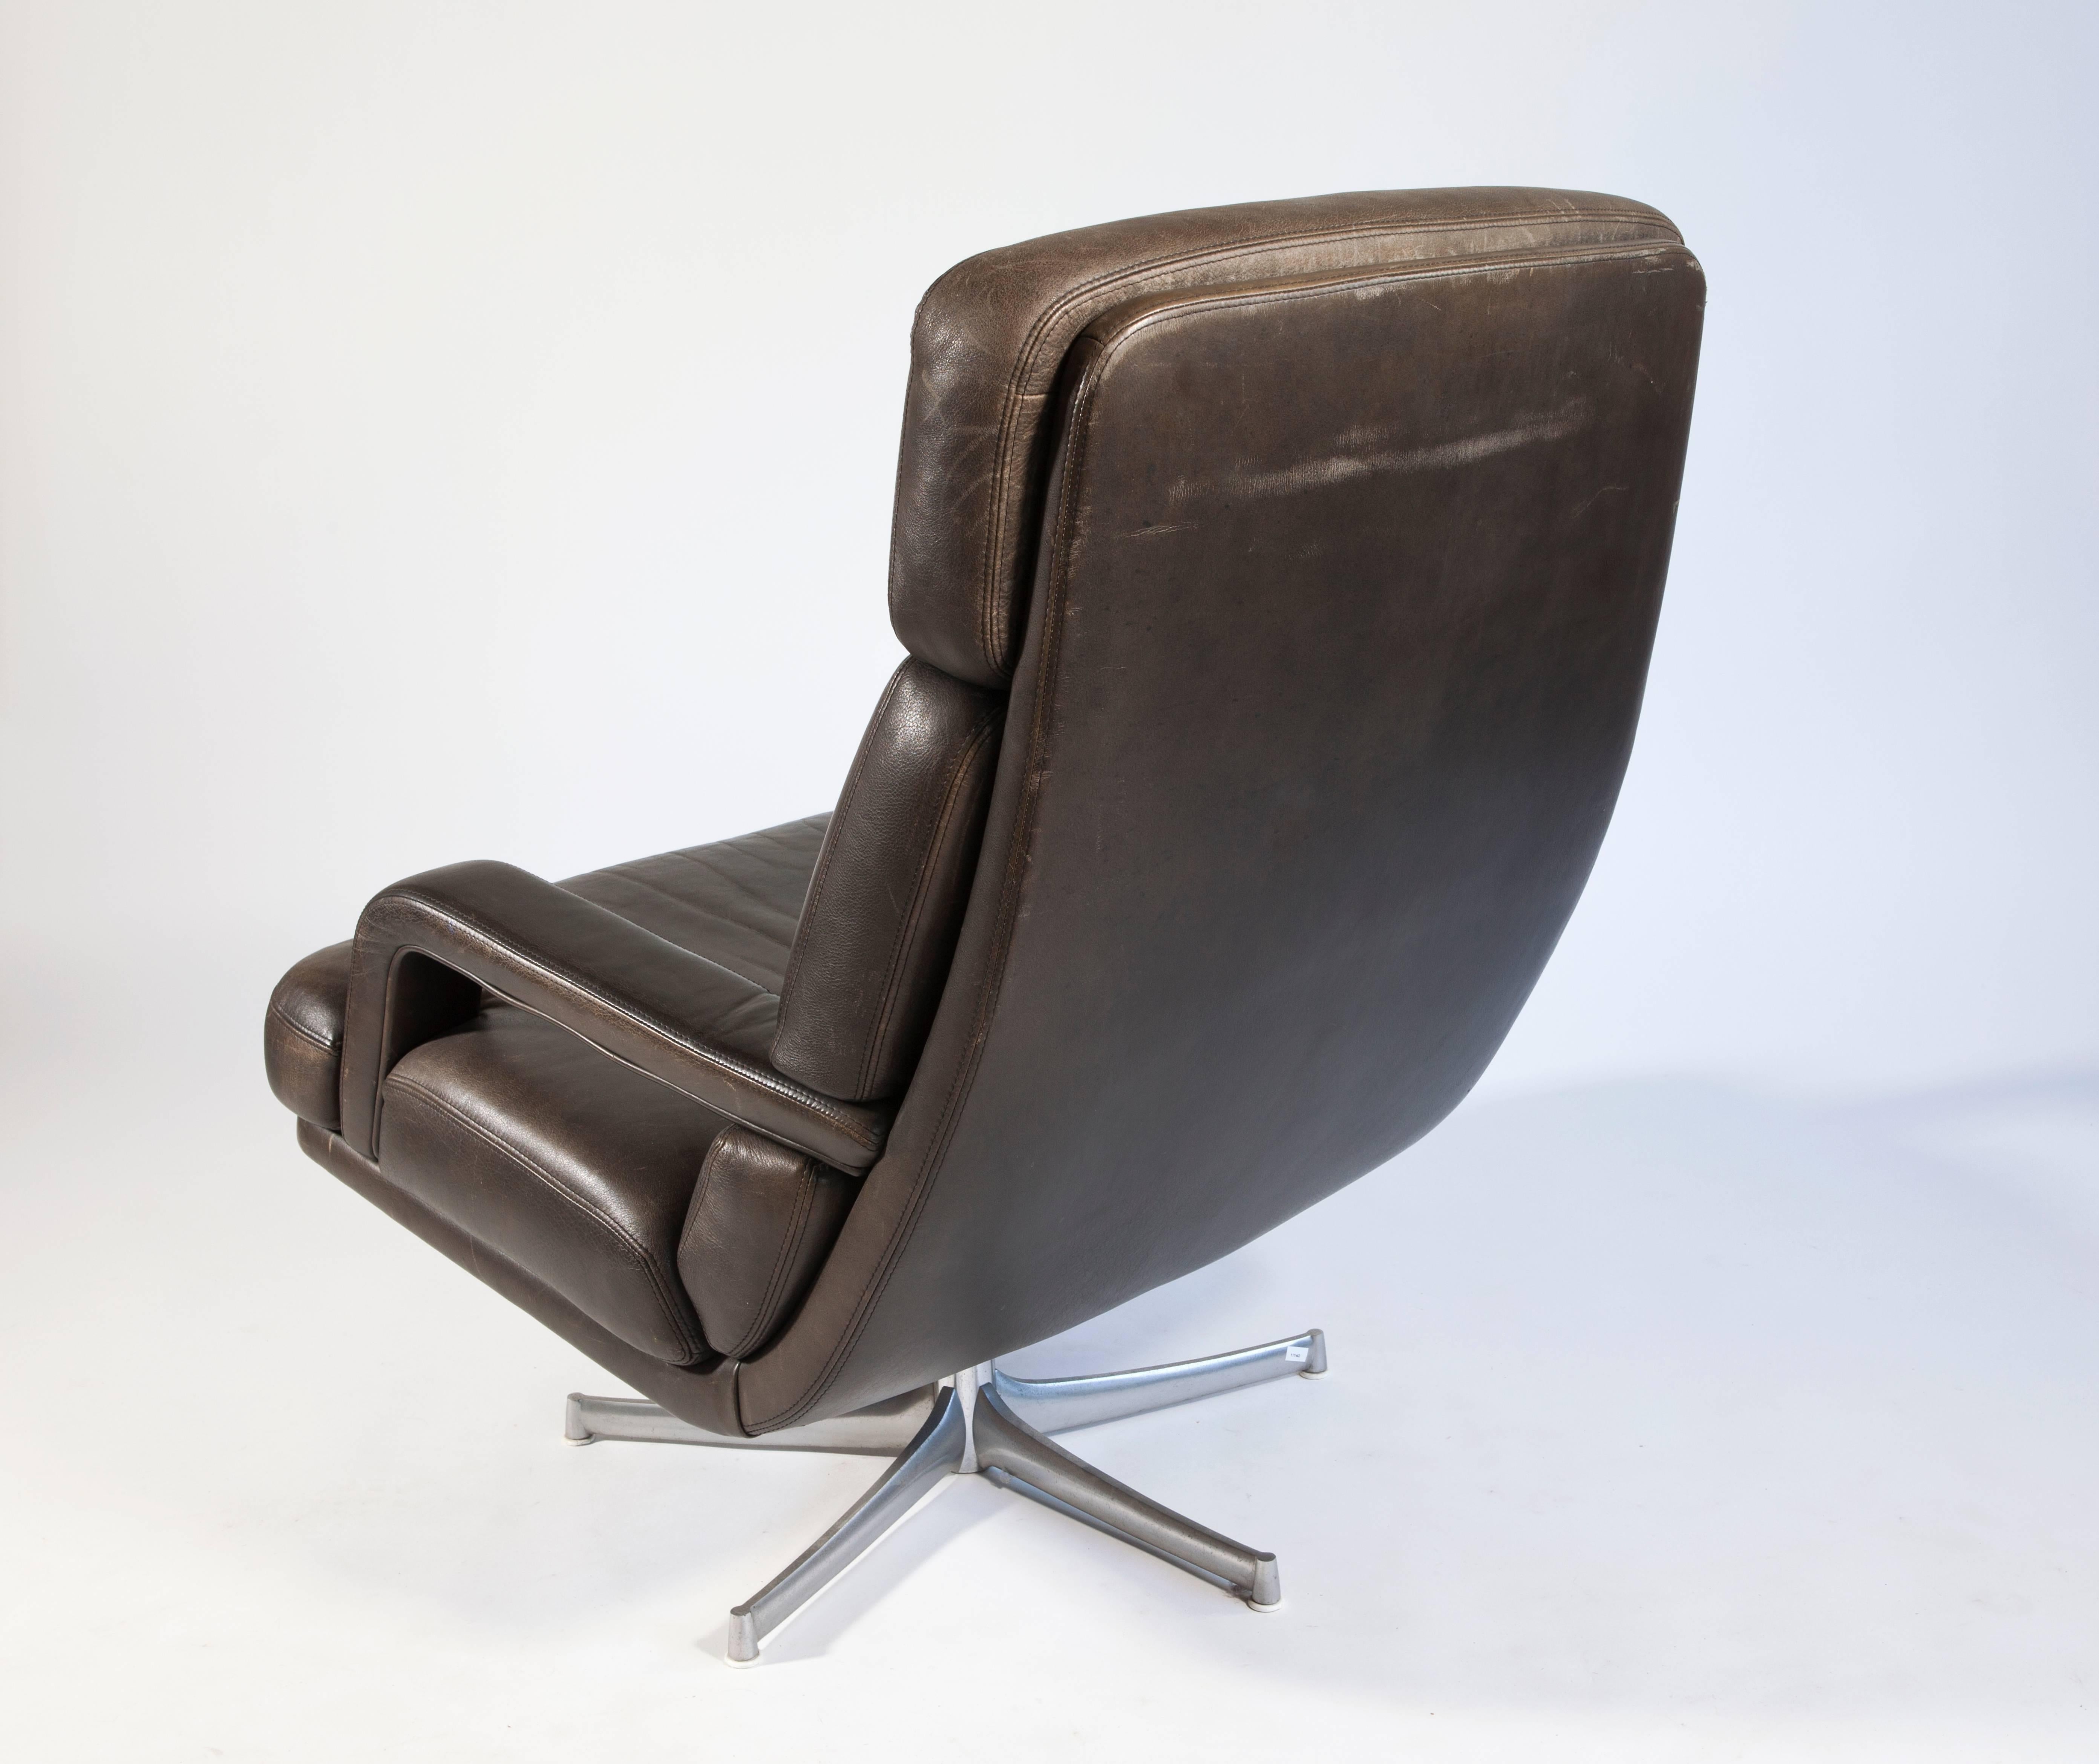 Very comfortable lounge chair designed by Bernd Münzebrock for the German manufacturer Walter Knoll, early 1970s. The model of the chair is 'Don', type 176N and is marked underneath the seating with the manufacturers label 'Walter Knoll Germany'.